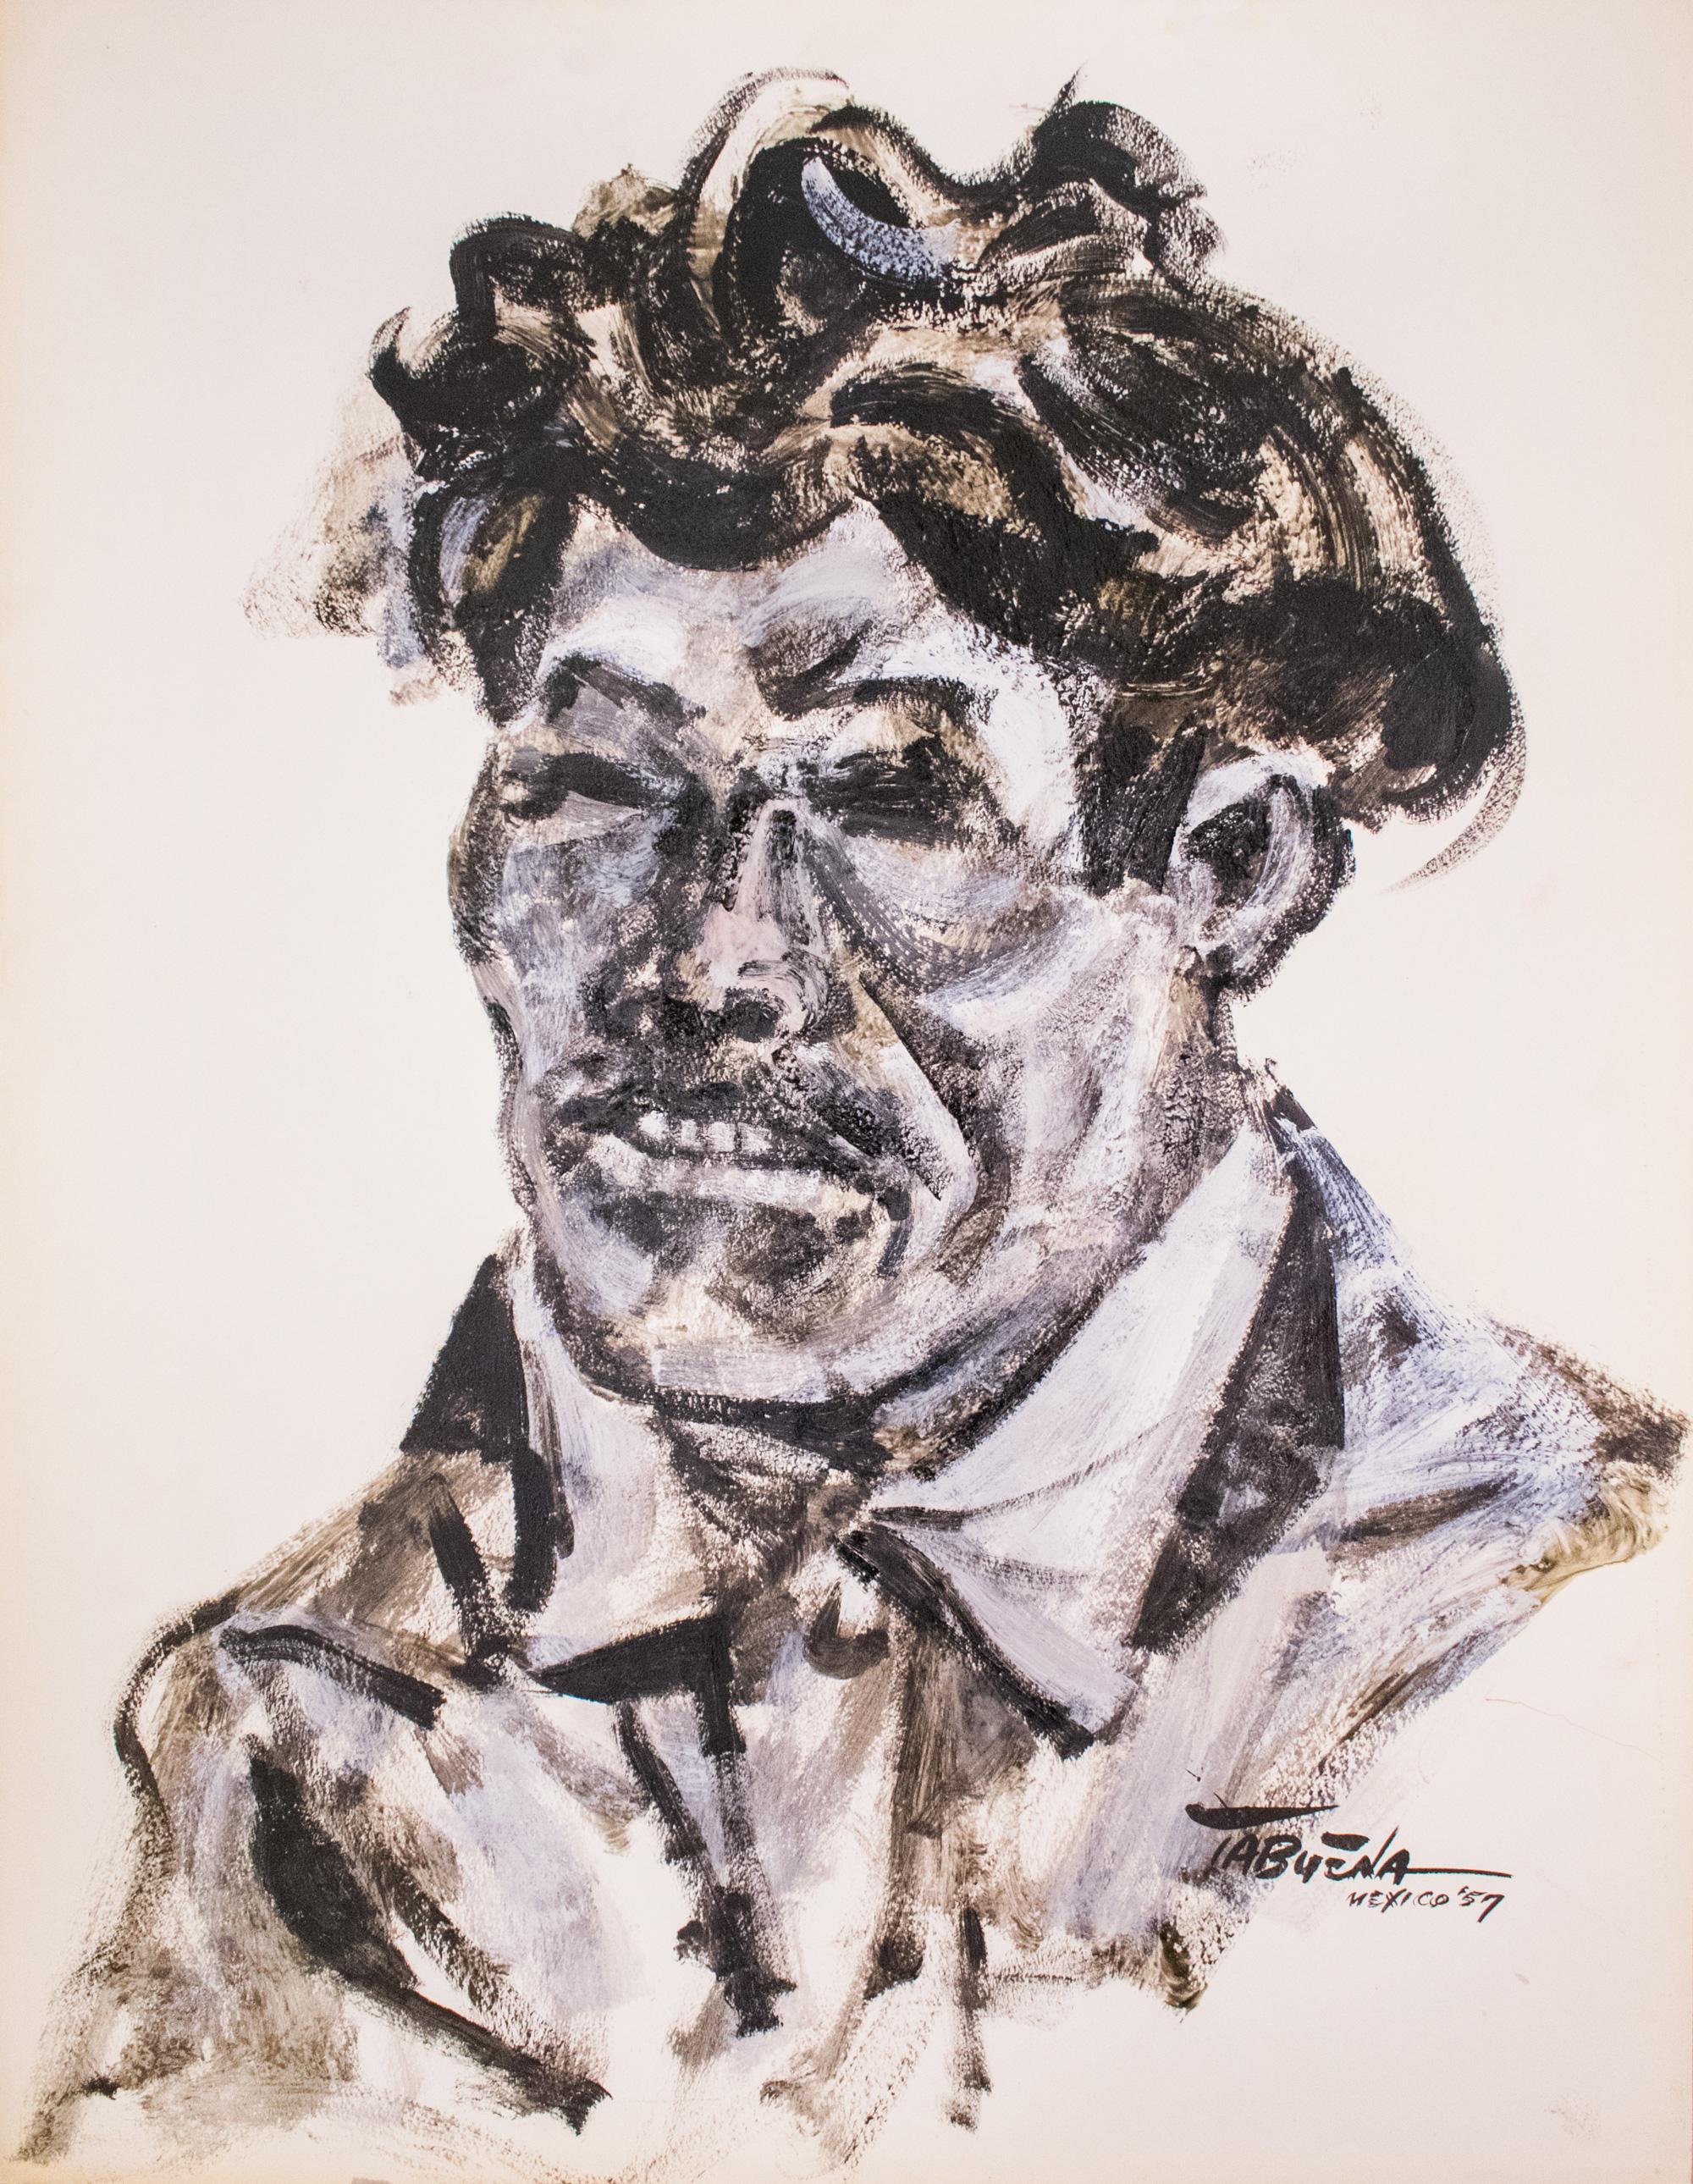 Romeo Tabuena Portrait Painting - "One Mexican Face", Duco on Paper, Modern Filipino-Mexican Art, 1957